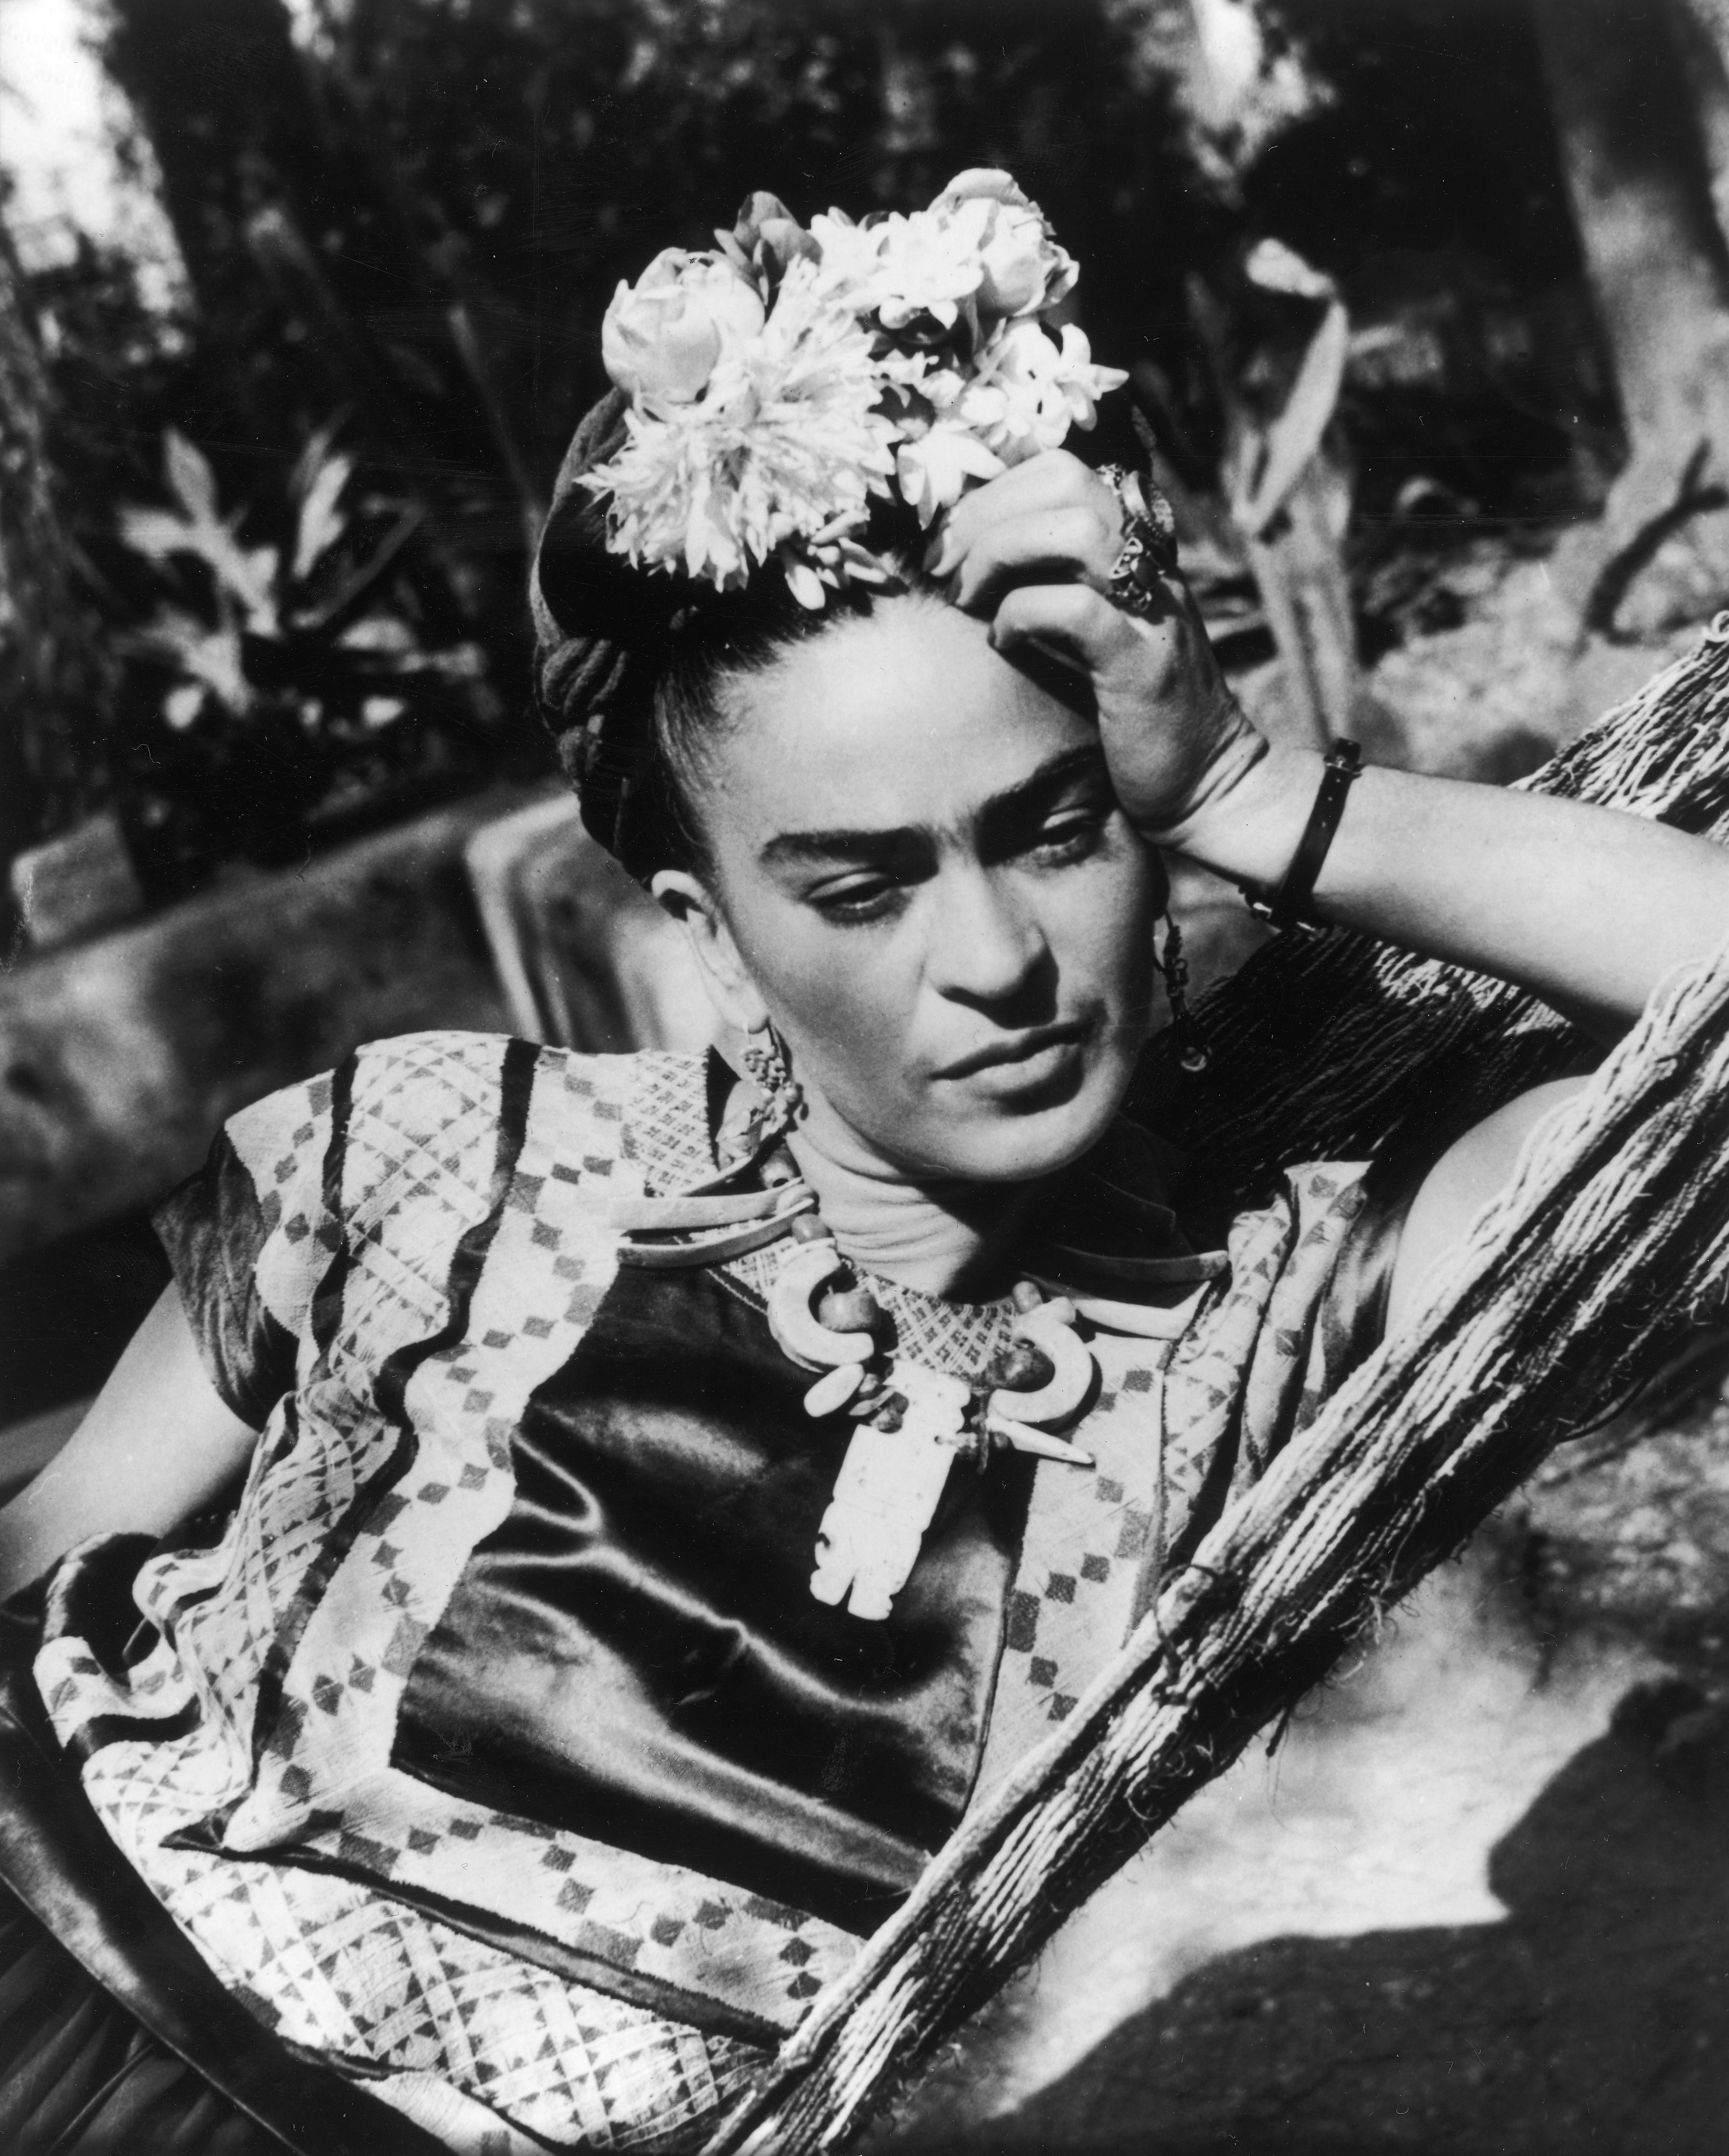 Behind Frida Kahlos Real and Rumored Affairs With Men and Women